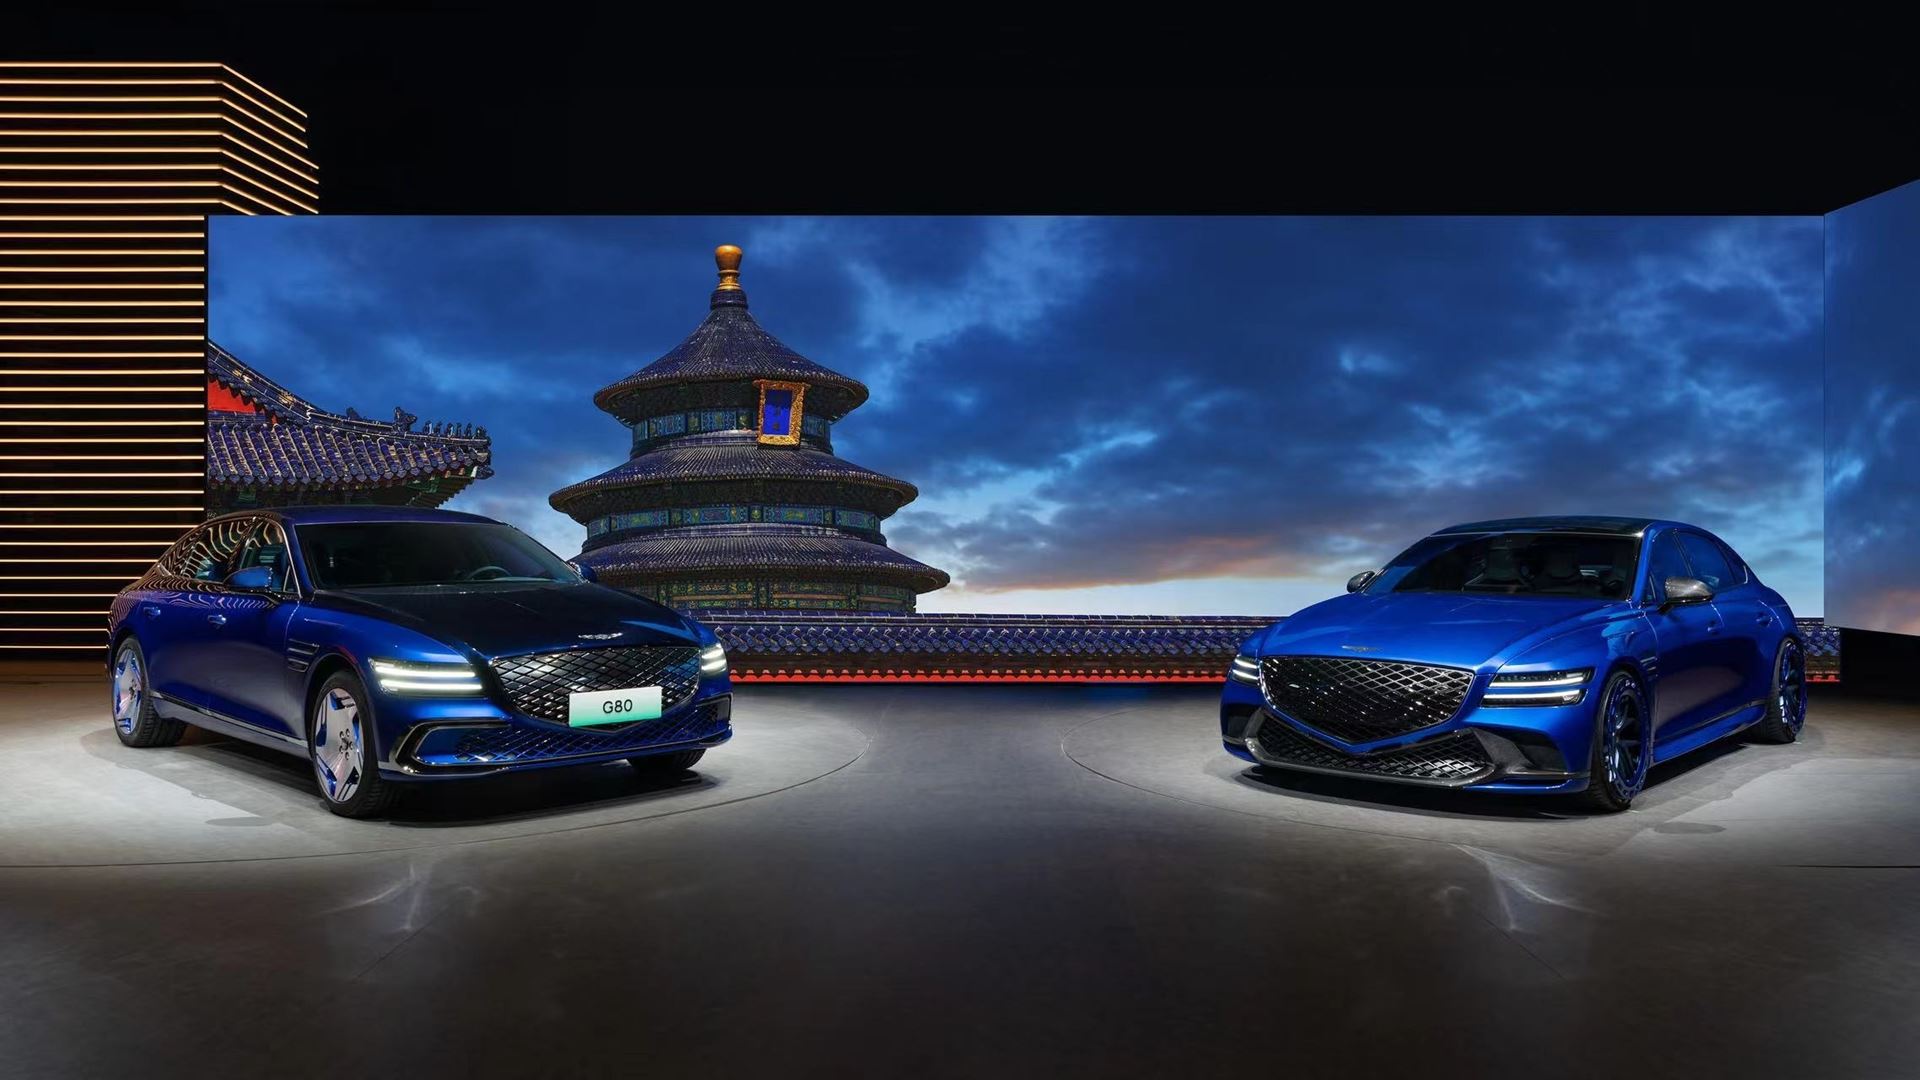 genesis-presents-double-world-premiere-of-redesigned-electrified-g80-and-g80-ev-magma-concept-at-aut